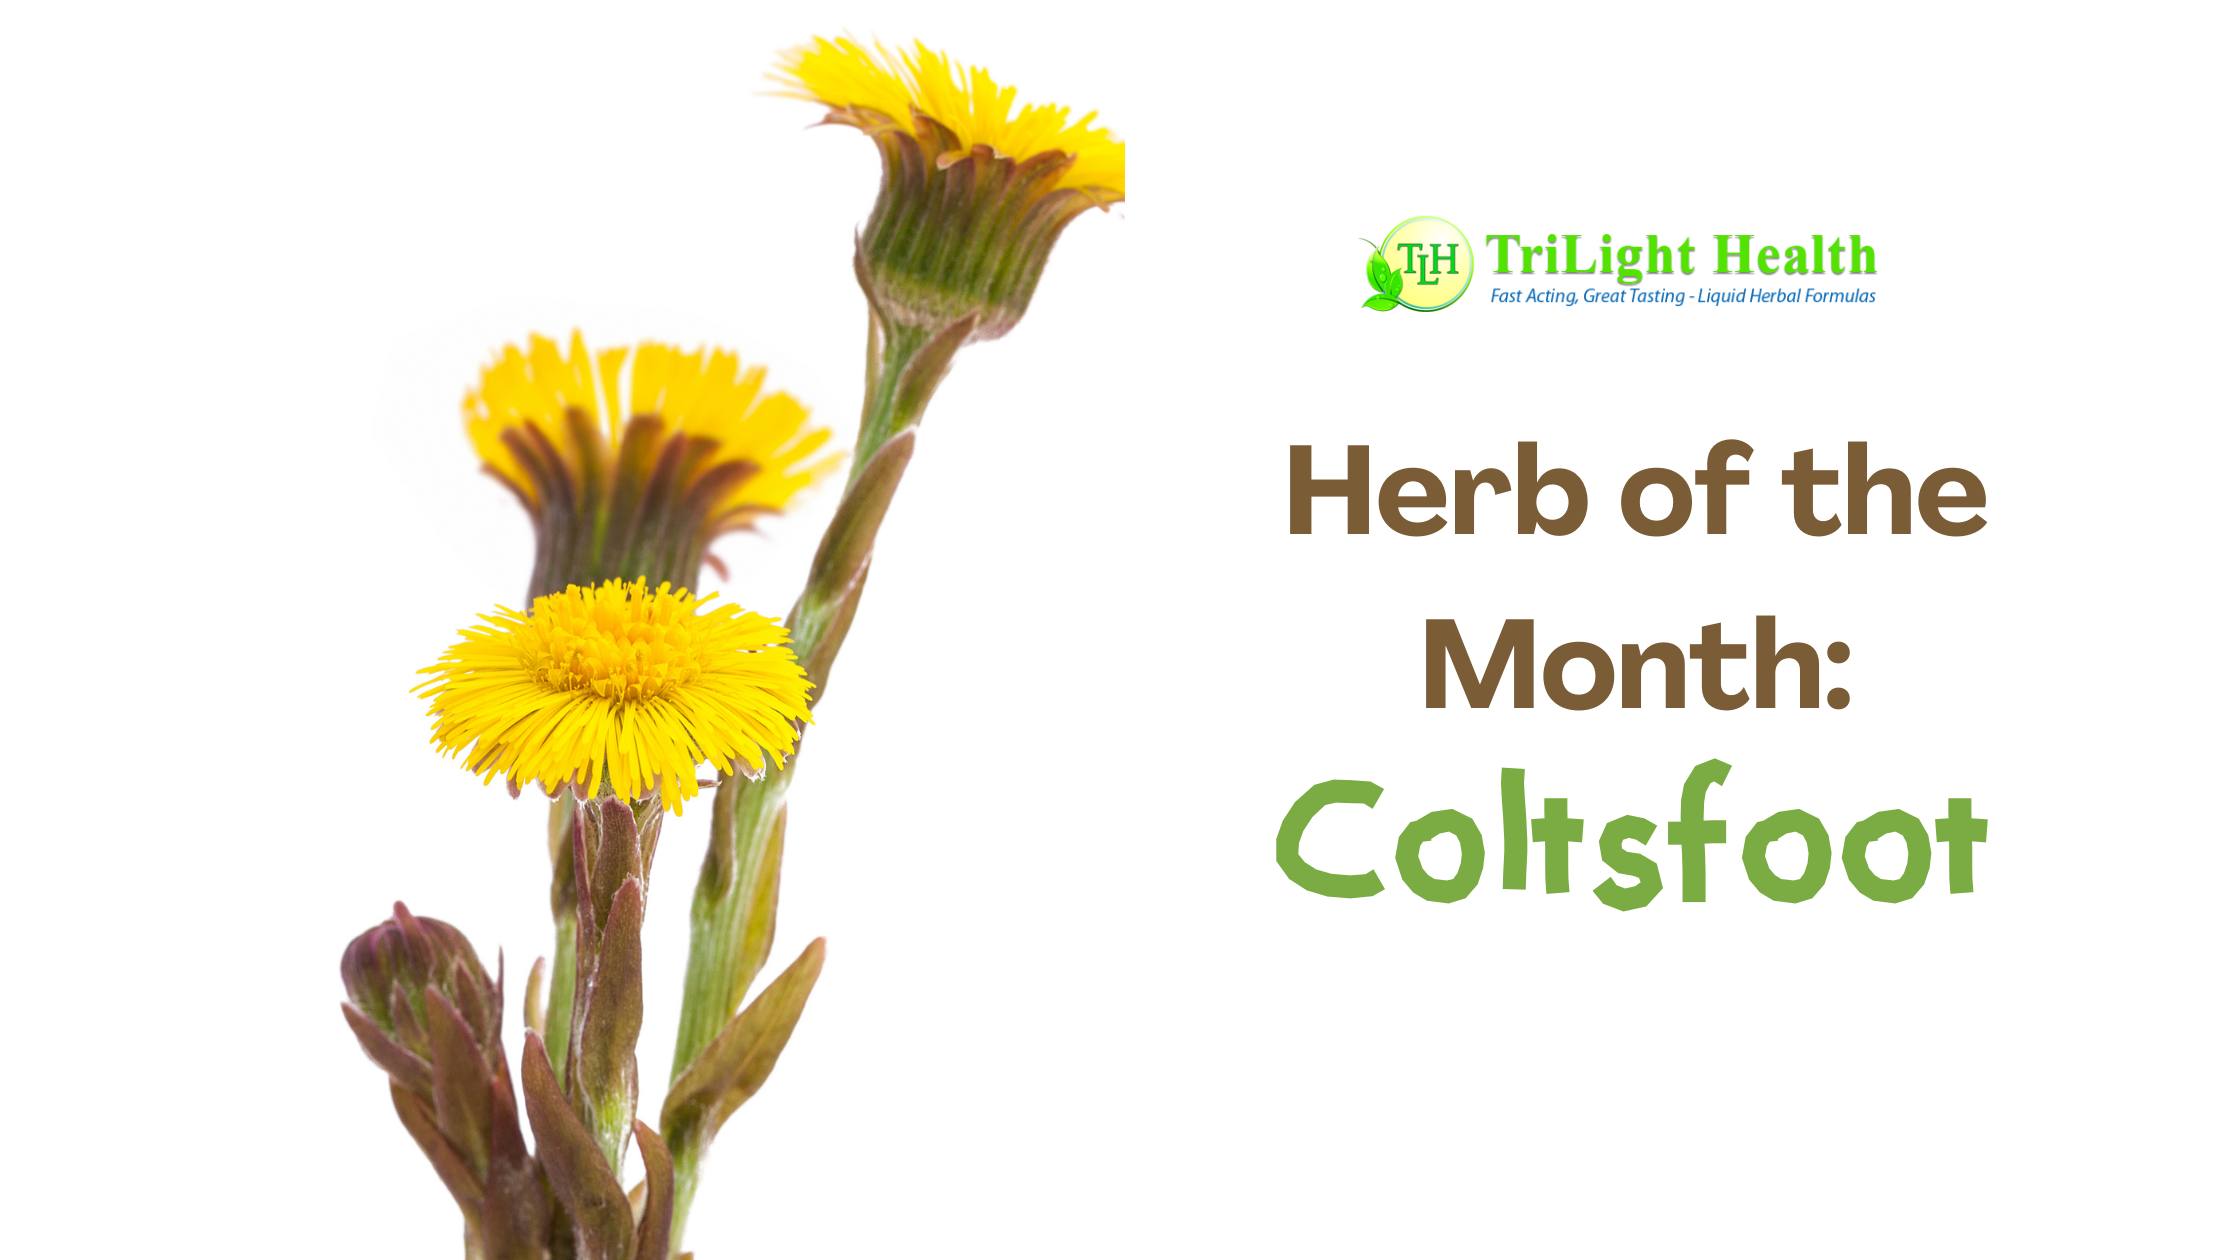 Herb of the Month: Coltsfoot